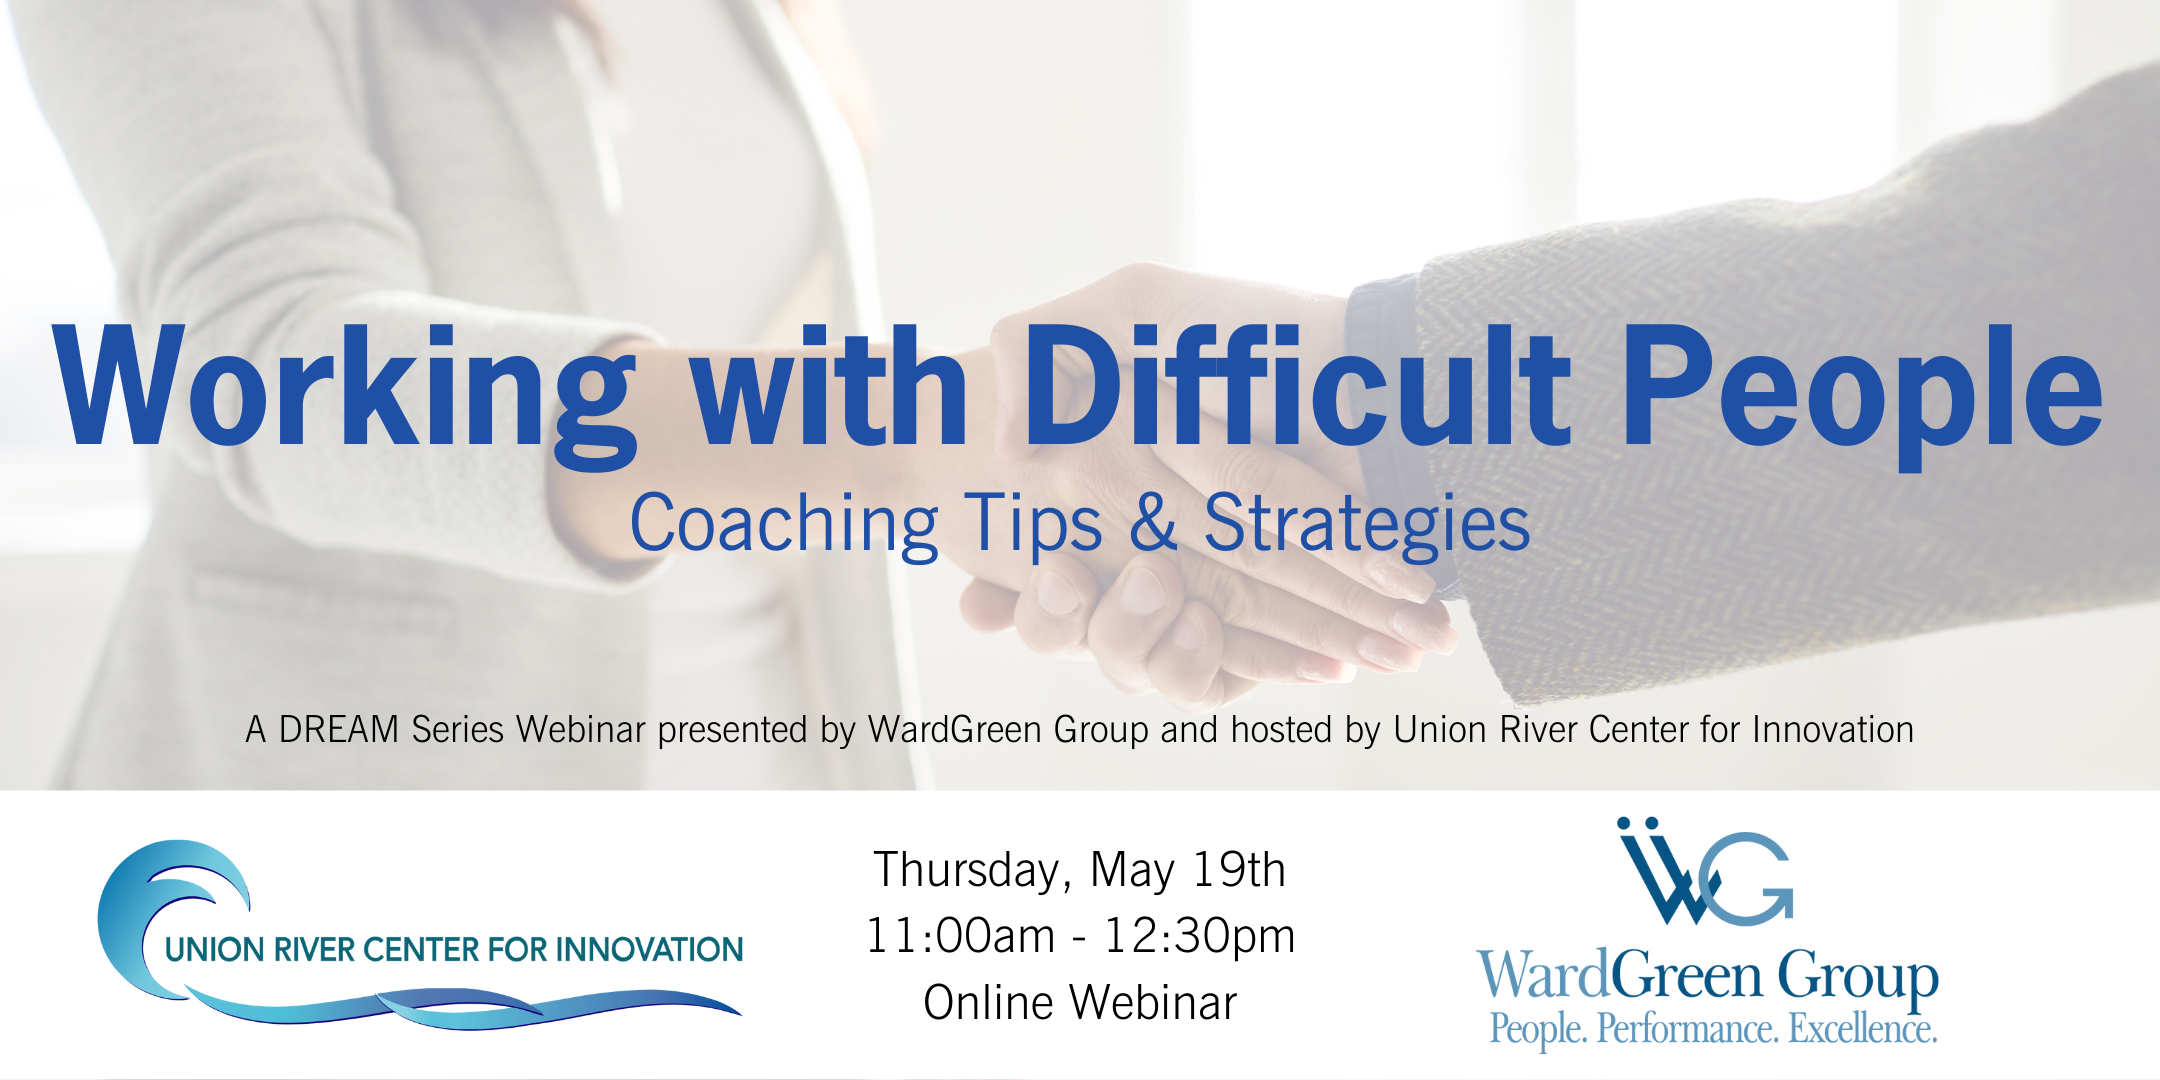 Working with Difficult People Webinar | Union River Center for Innovation